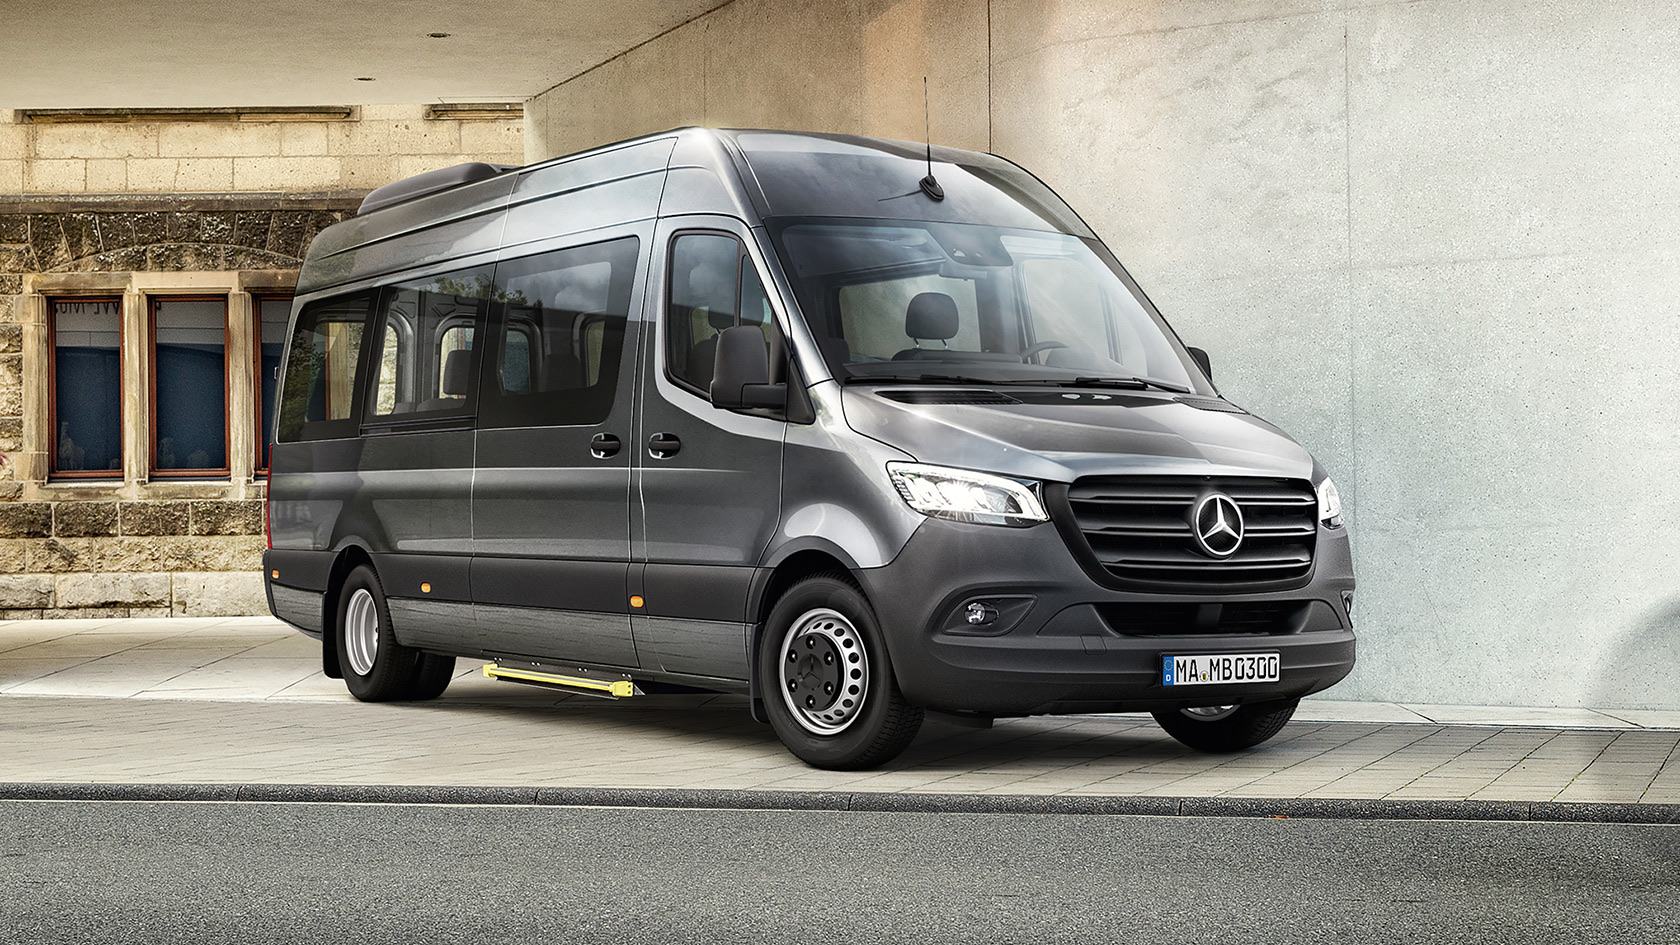 The Ultimate Guide to Hiring a Minibus for the Perfect Prom Night